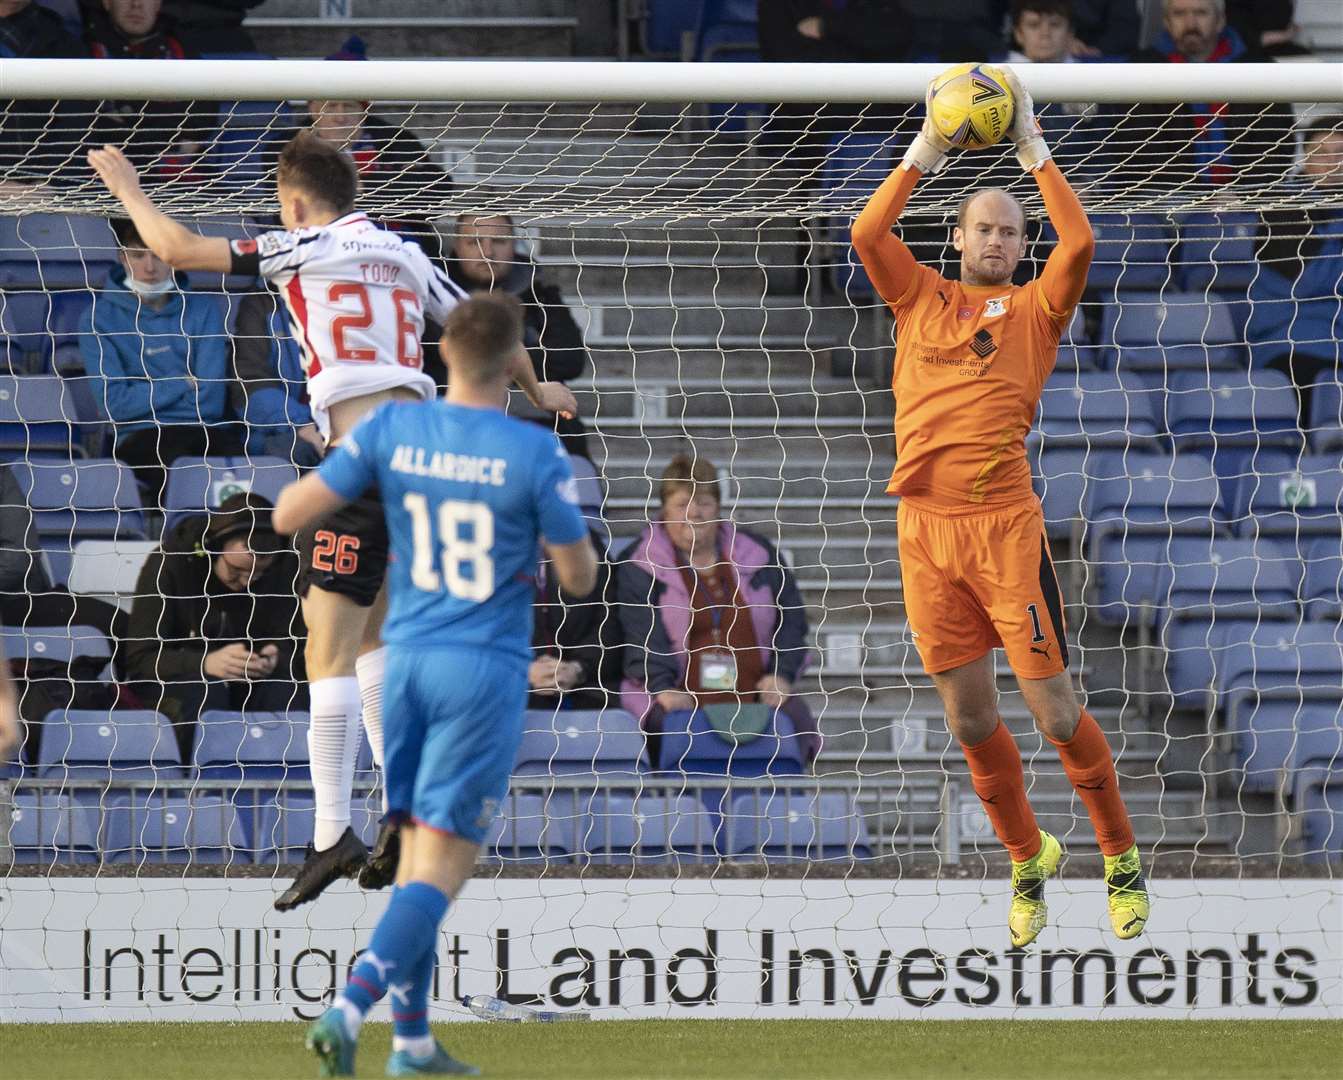 Picture - Ken Macpherson, Inverness. Inverness CT(1) v Dunfermline(2). 13.11.20. ICT 'keeper Mark Ridgers safely holds a Dunfermline ball across the goalmouth.